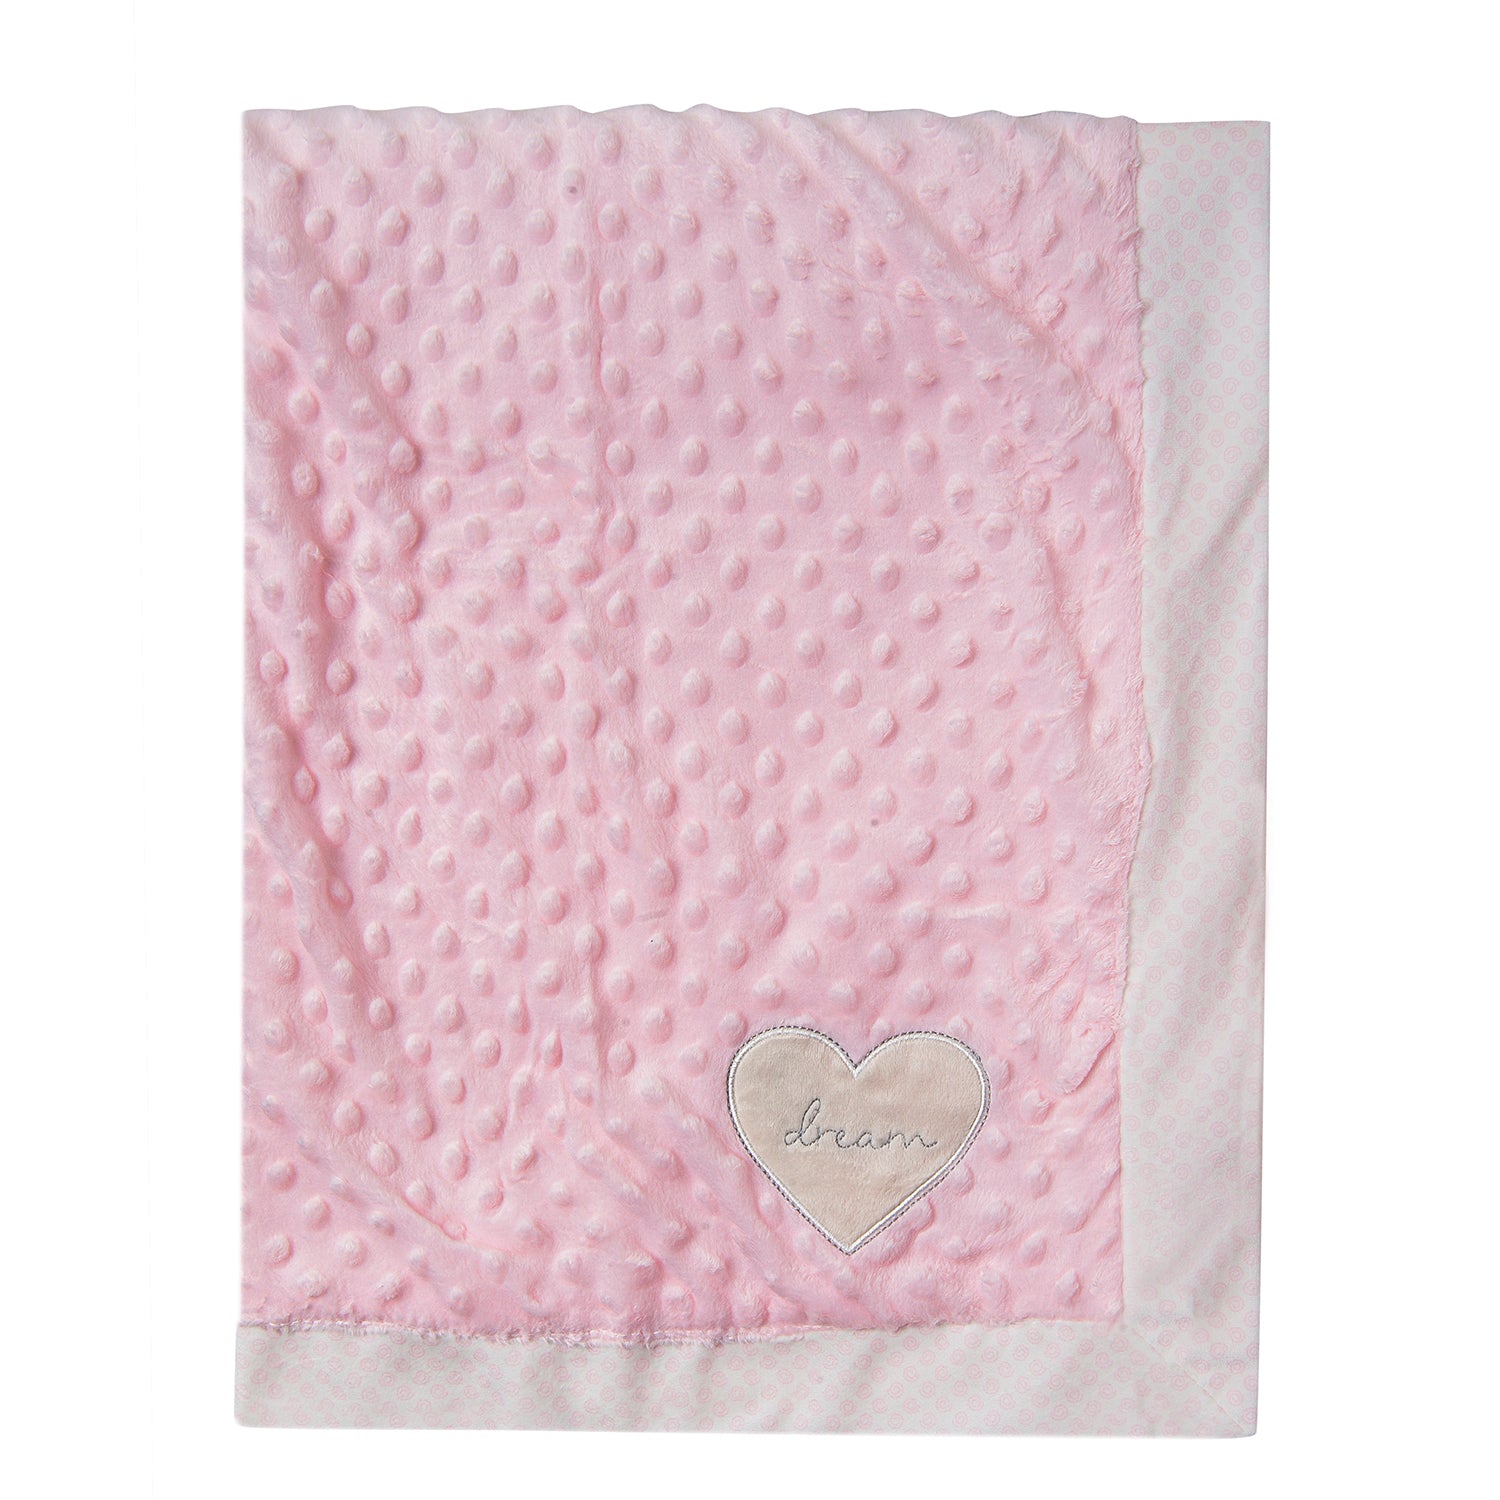 Baby Moo Heart Full Of Dreams Soft Reversible Bubble Blanket Pink